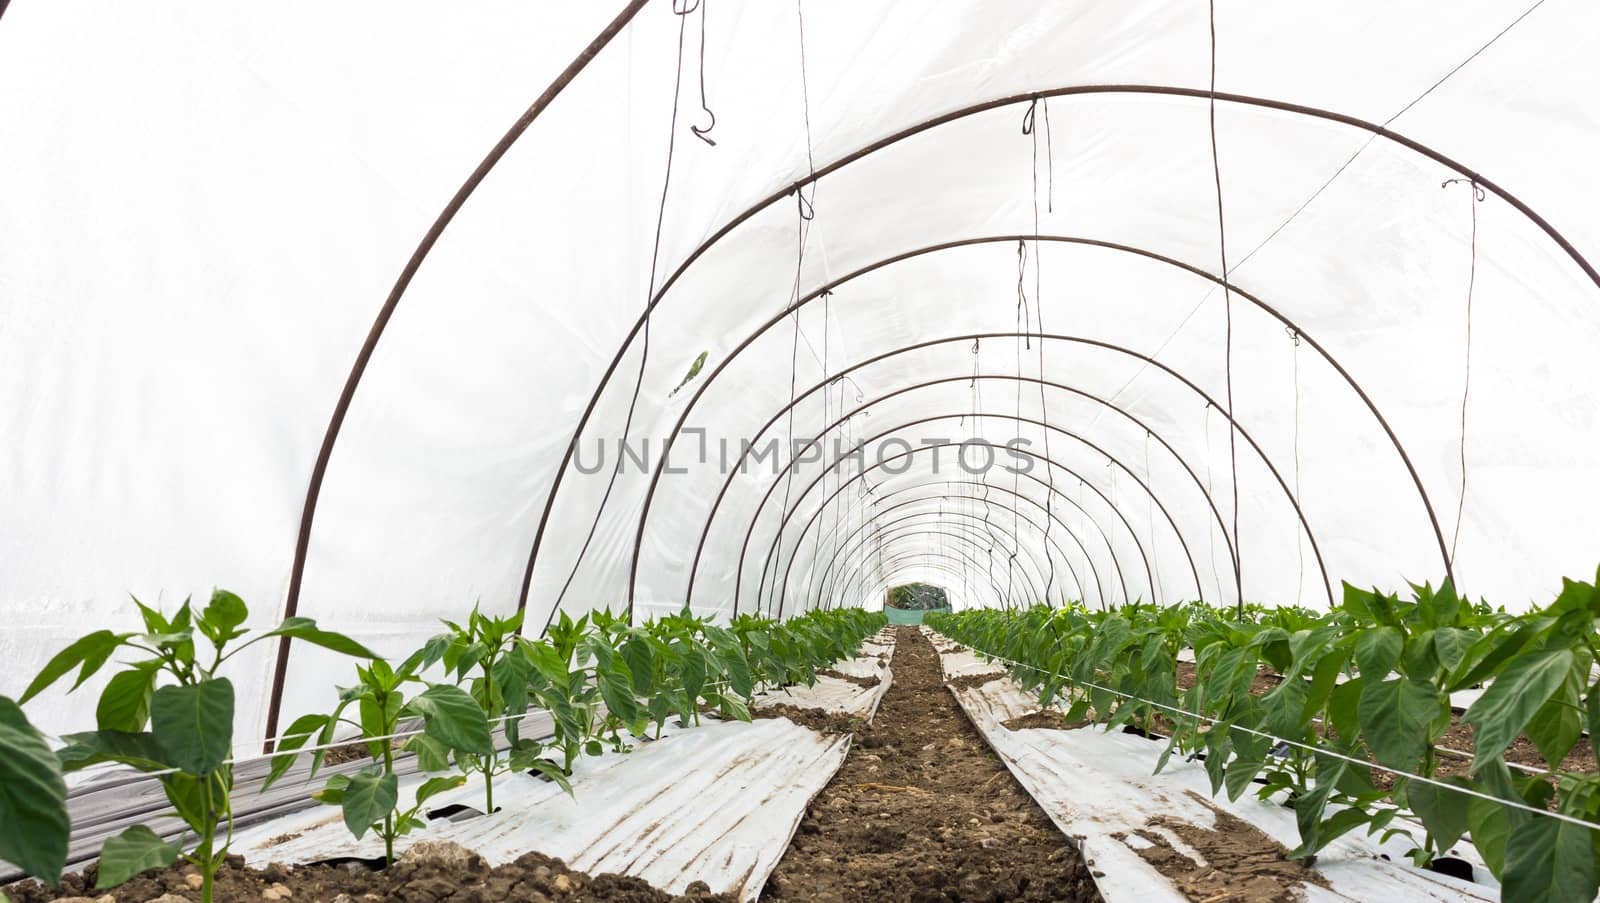 The microclimate created in greenhouses allows maturation of the product